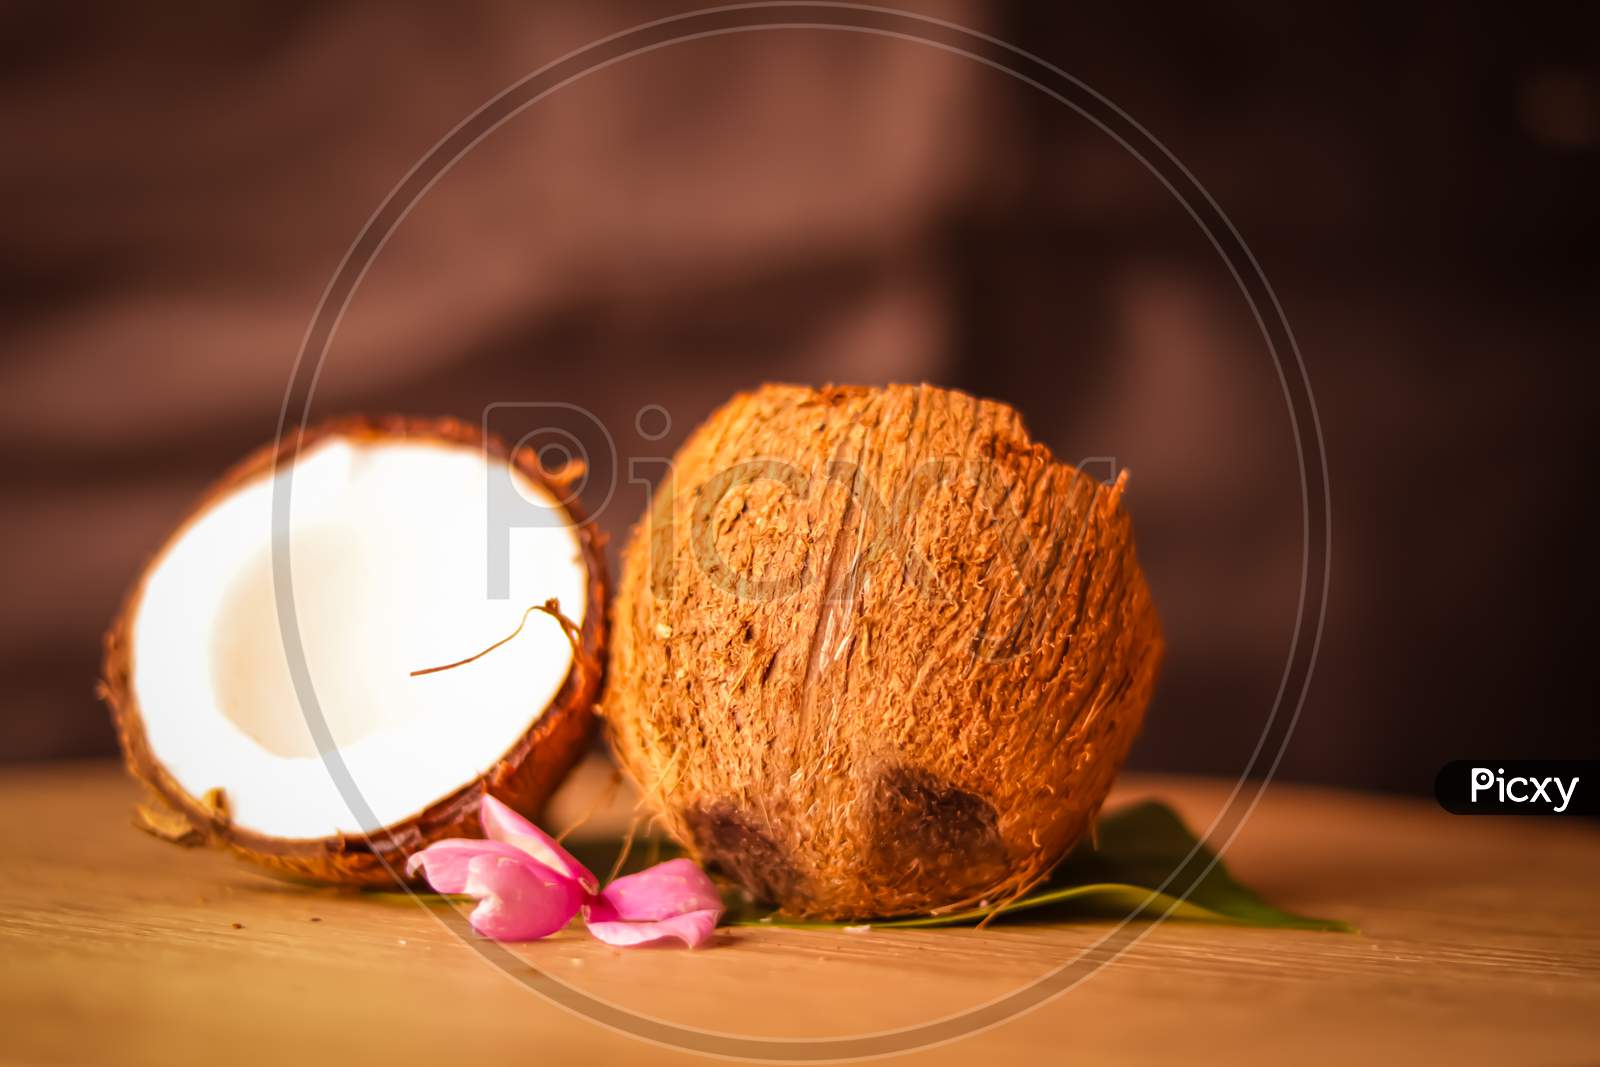 Half Coconut With Green Leaves Wooden On Background,Hd Footage Of Coconut Milk And Half Coconut On Wooden,Selective Focus On Subject,